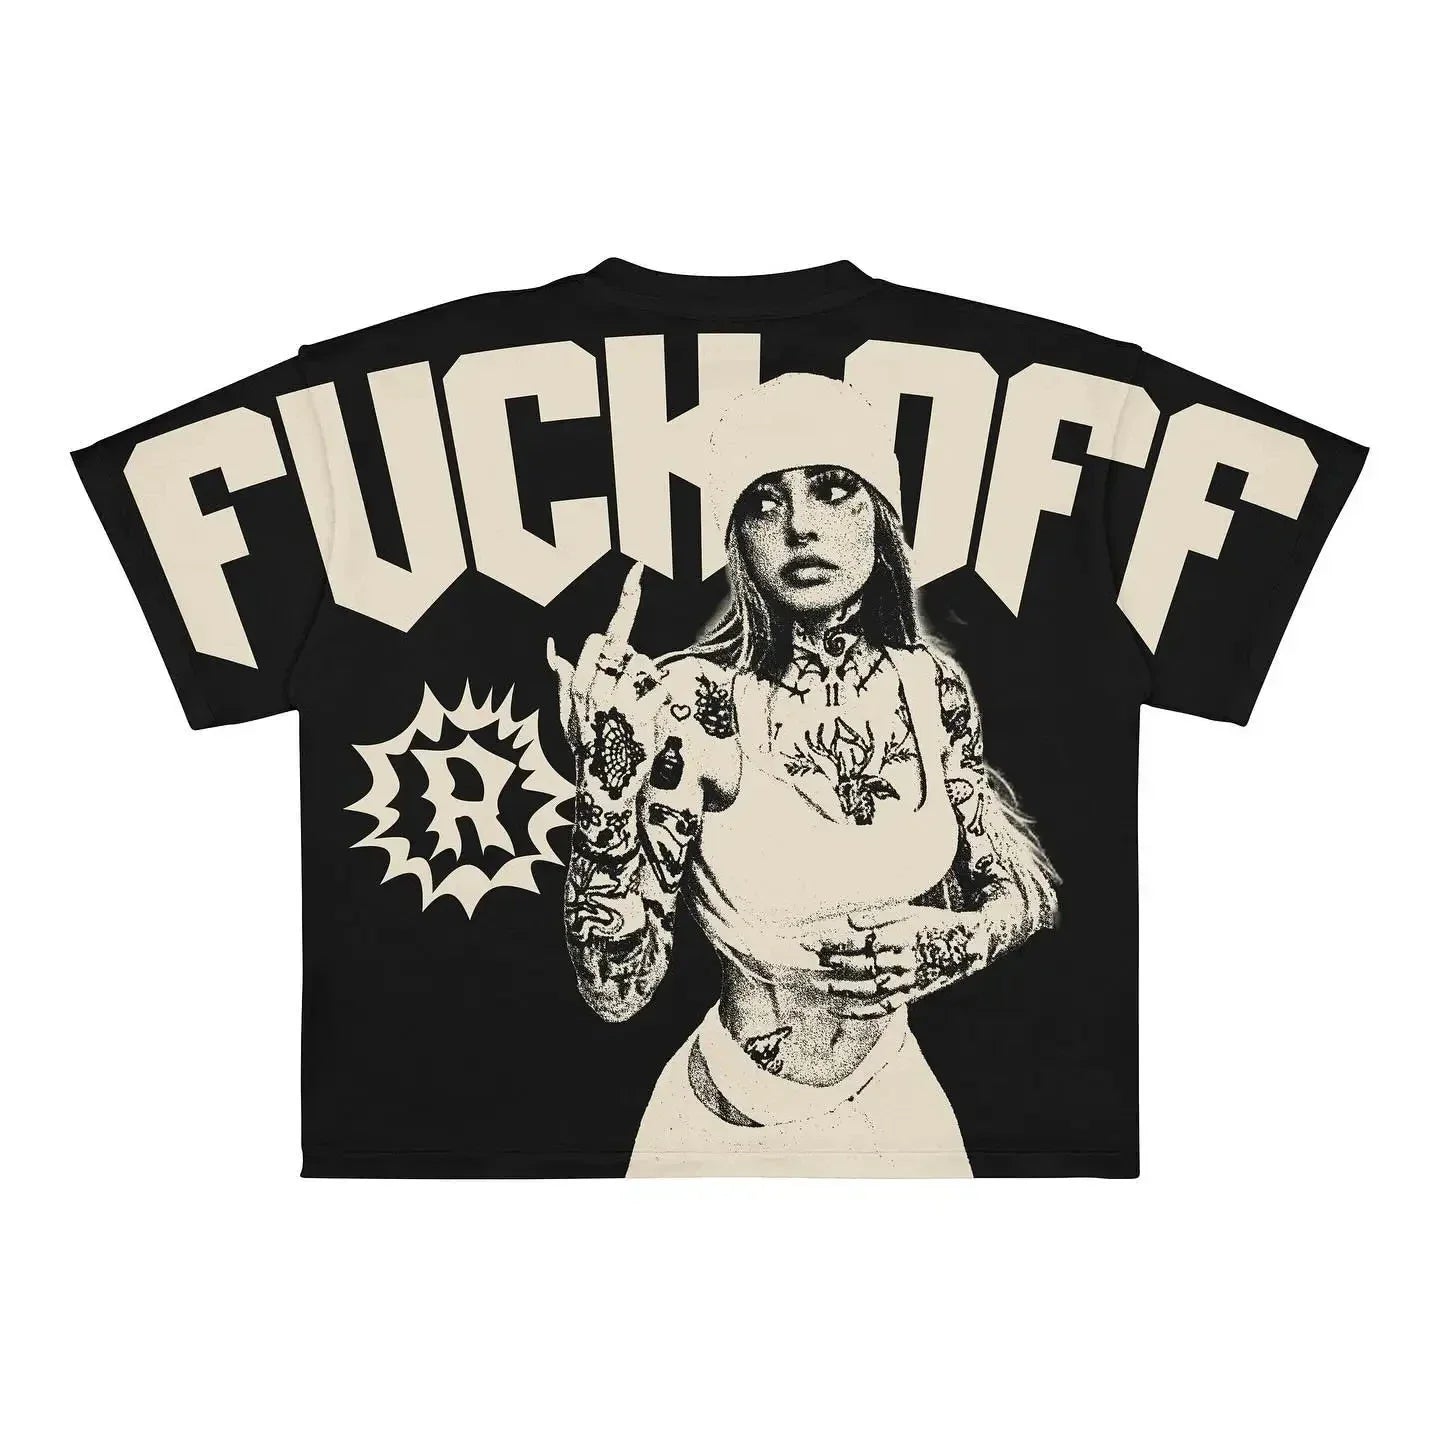 **Maramalive™ Punk Hip Hop Graphic T Shirts Mens Vintage Y2k Top Goth Oversized T Shirt Fashion Loose Casual Short Sleeve Streetwear** featuring a tattooed woman in a white beanie and sleeveless top, with large text reading "F* OFF" and graphic elements in the background, adding a touch of vintage Y2k hip-hop flair.